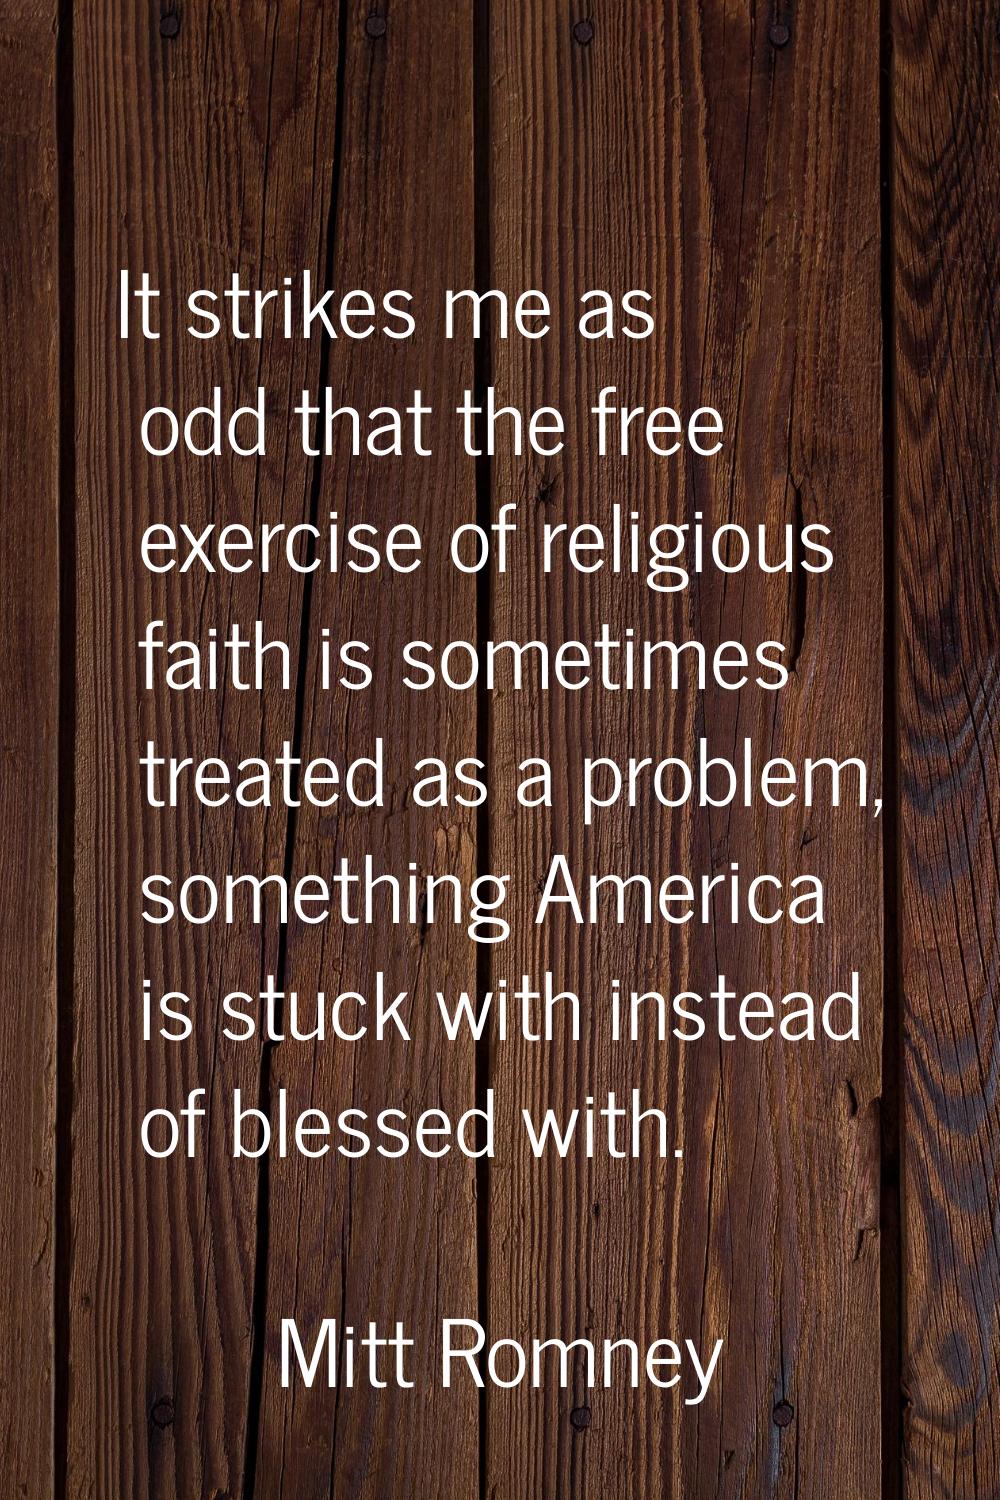 It strikes me as odd that the free exercise of religious faith is sometimes treated as a problem, s